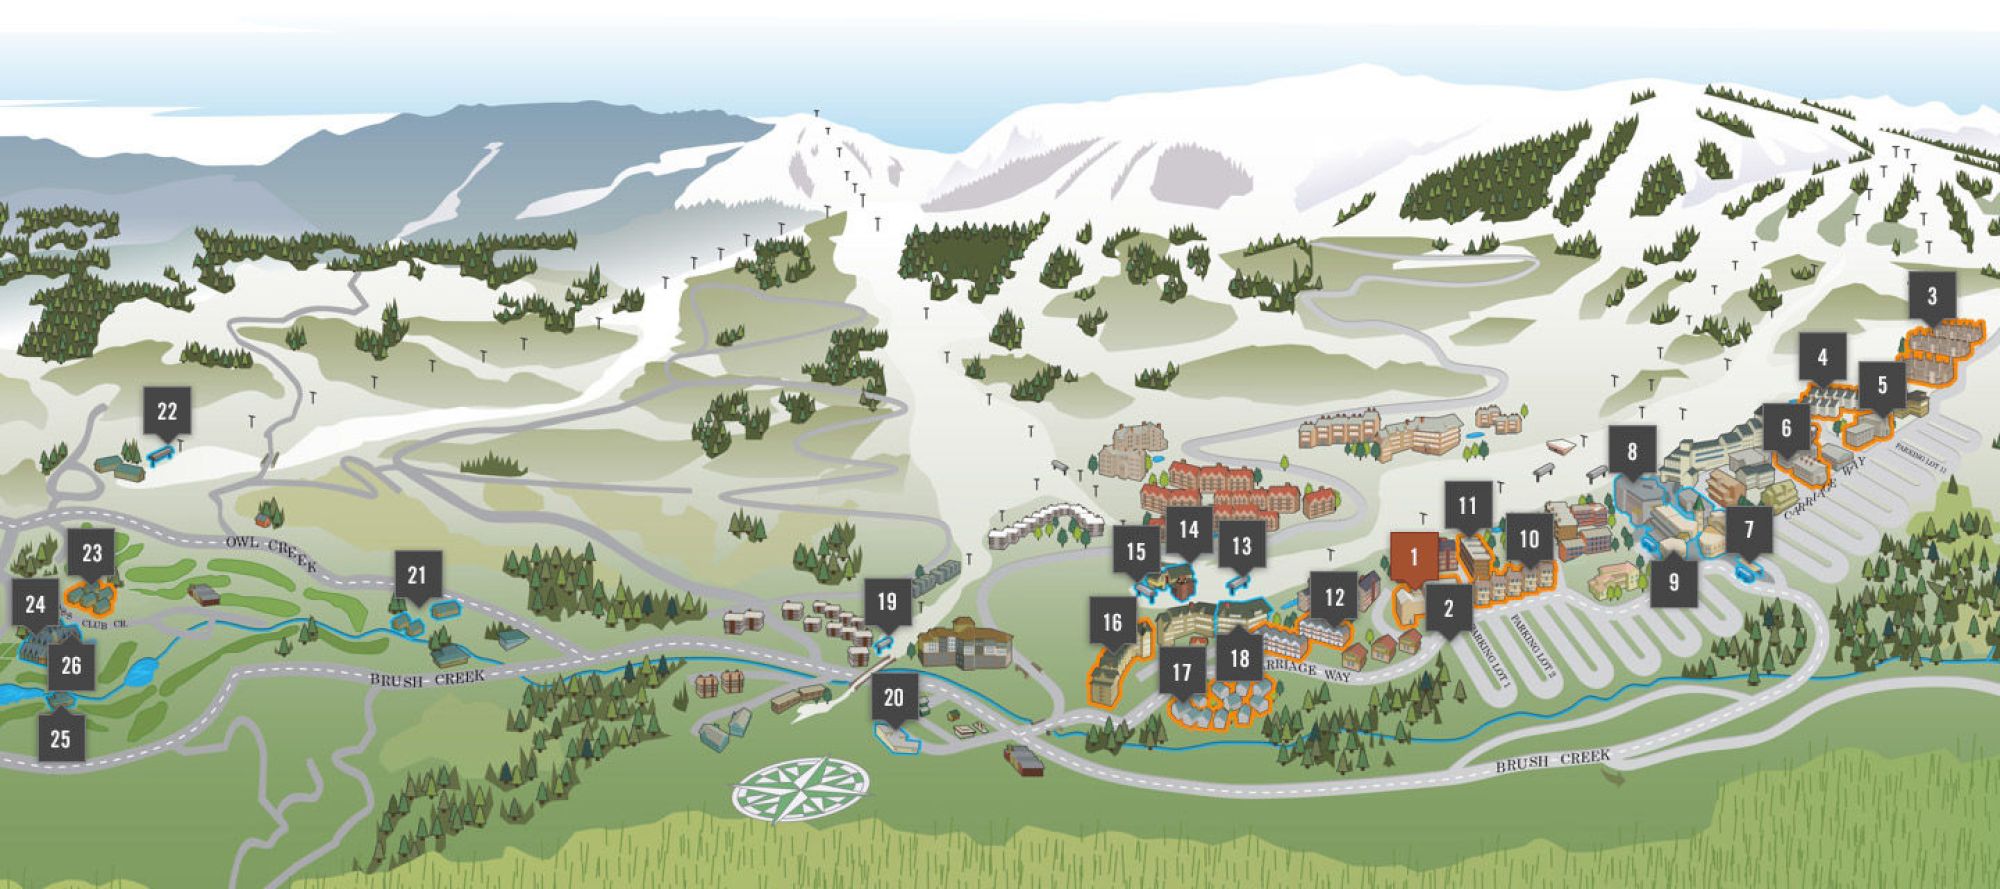 The image shows a detailed map of a mountainous resort area with marked buildings and roads amidst snowy regions and green landscapes.